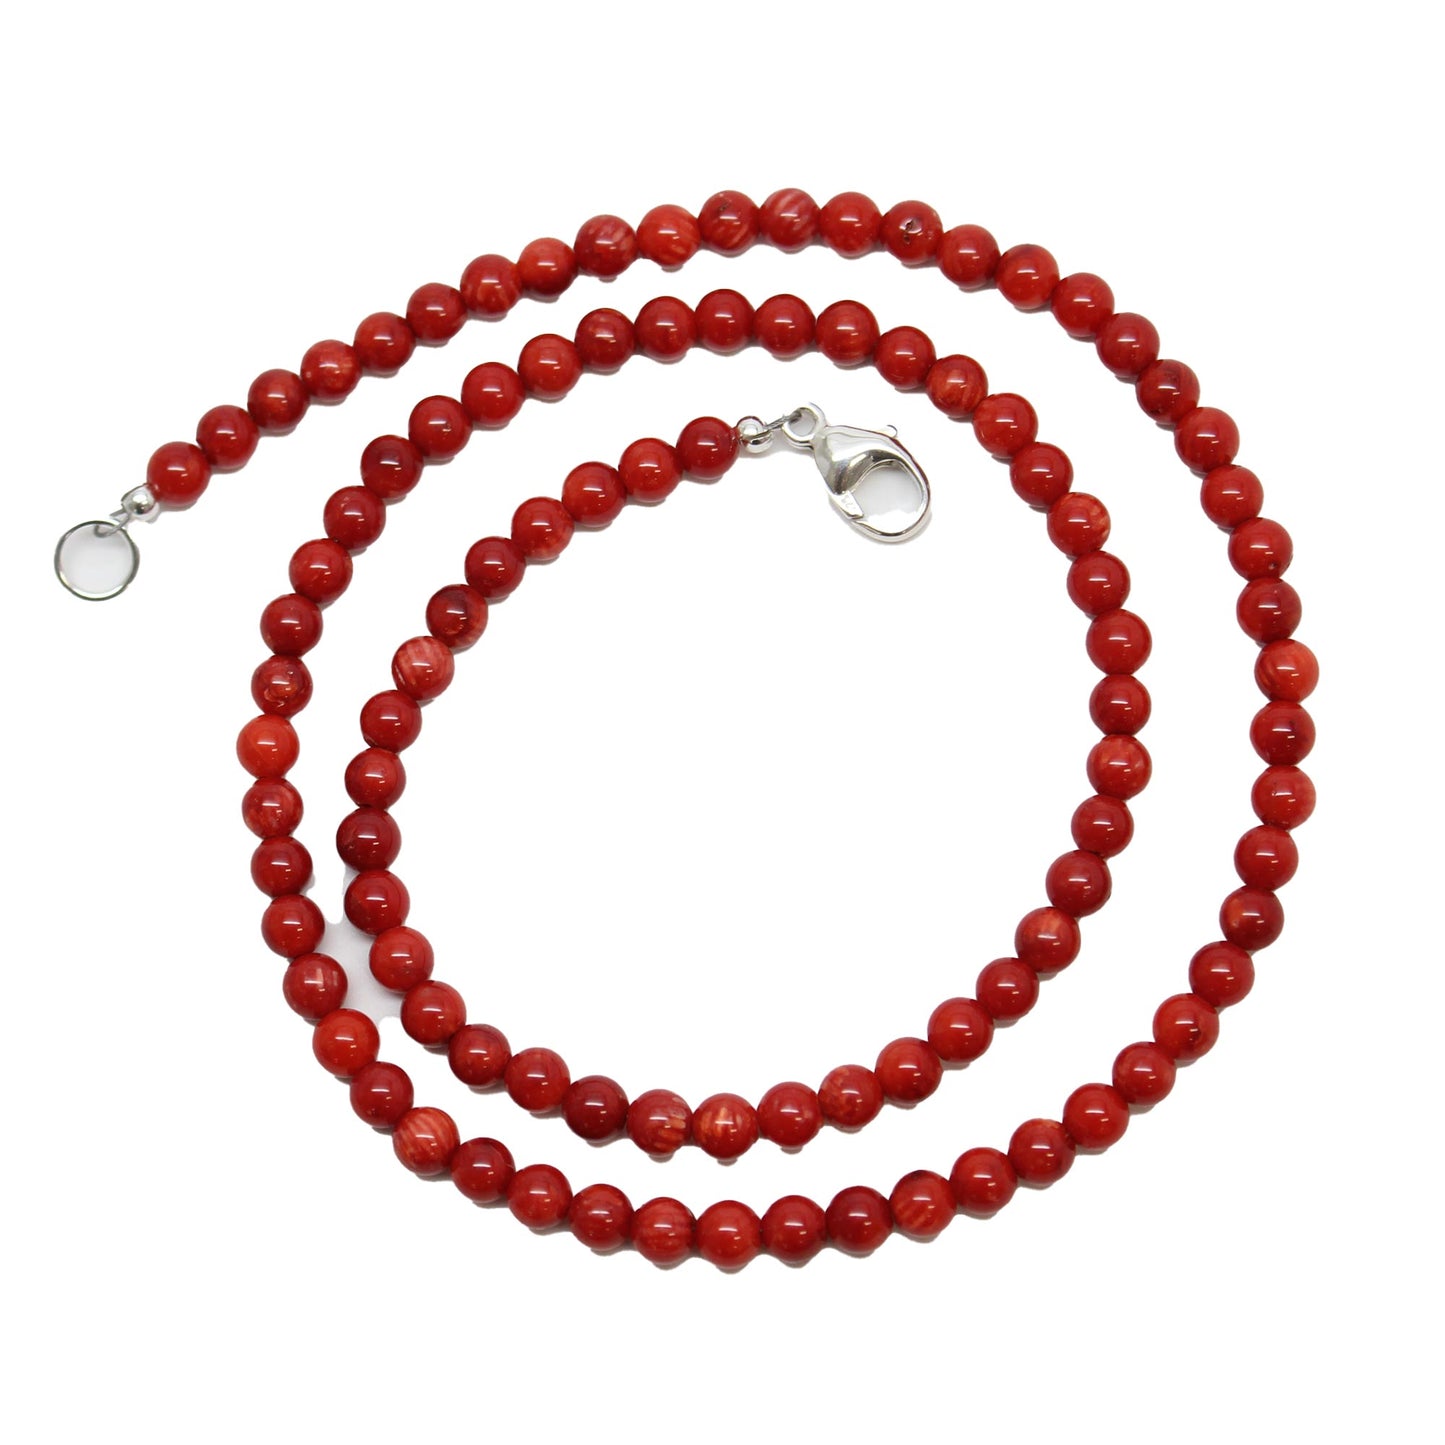 Branch Red Coral Necklace with Sterling Clasp 18.5